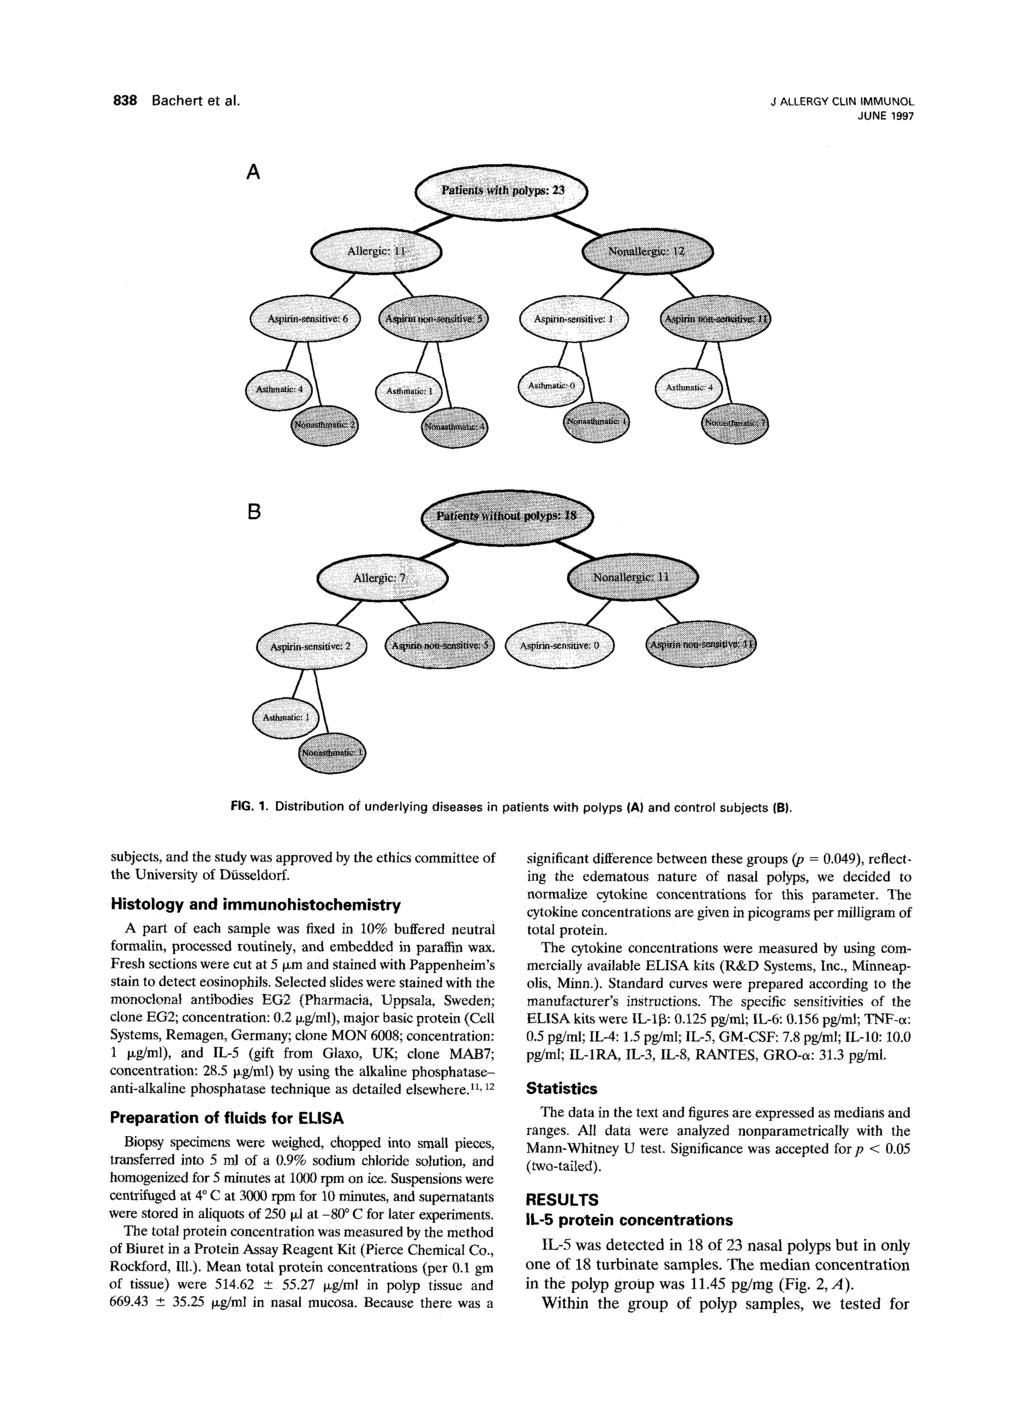 838 Bachert et al. J ALLERGY CLIN IMMUNOL JUNE 1997 FIG. 1. Distribution of underlying diseases in patients with polyps (A) and control subjects (B).